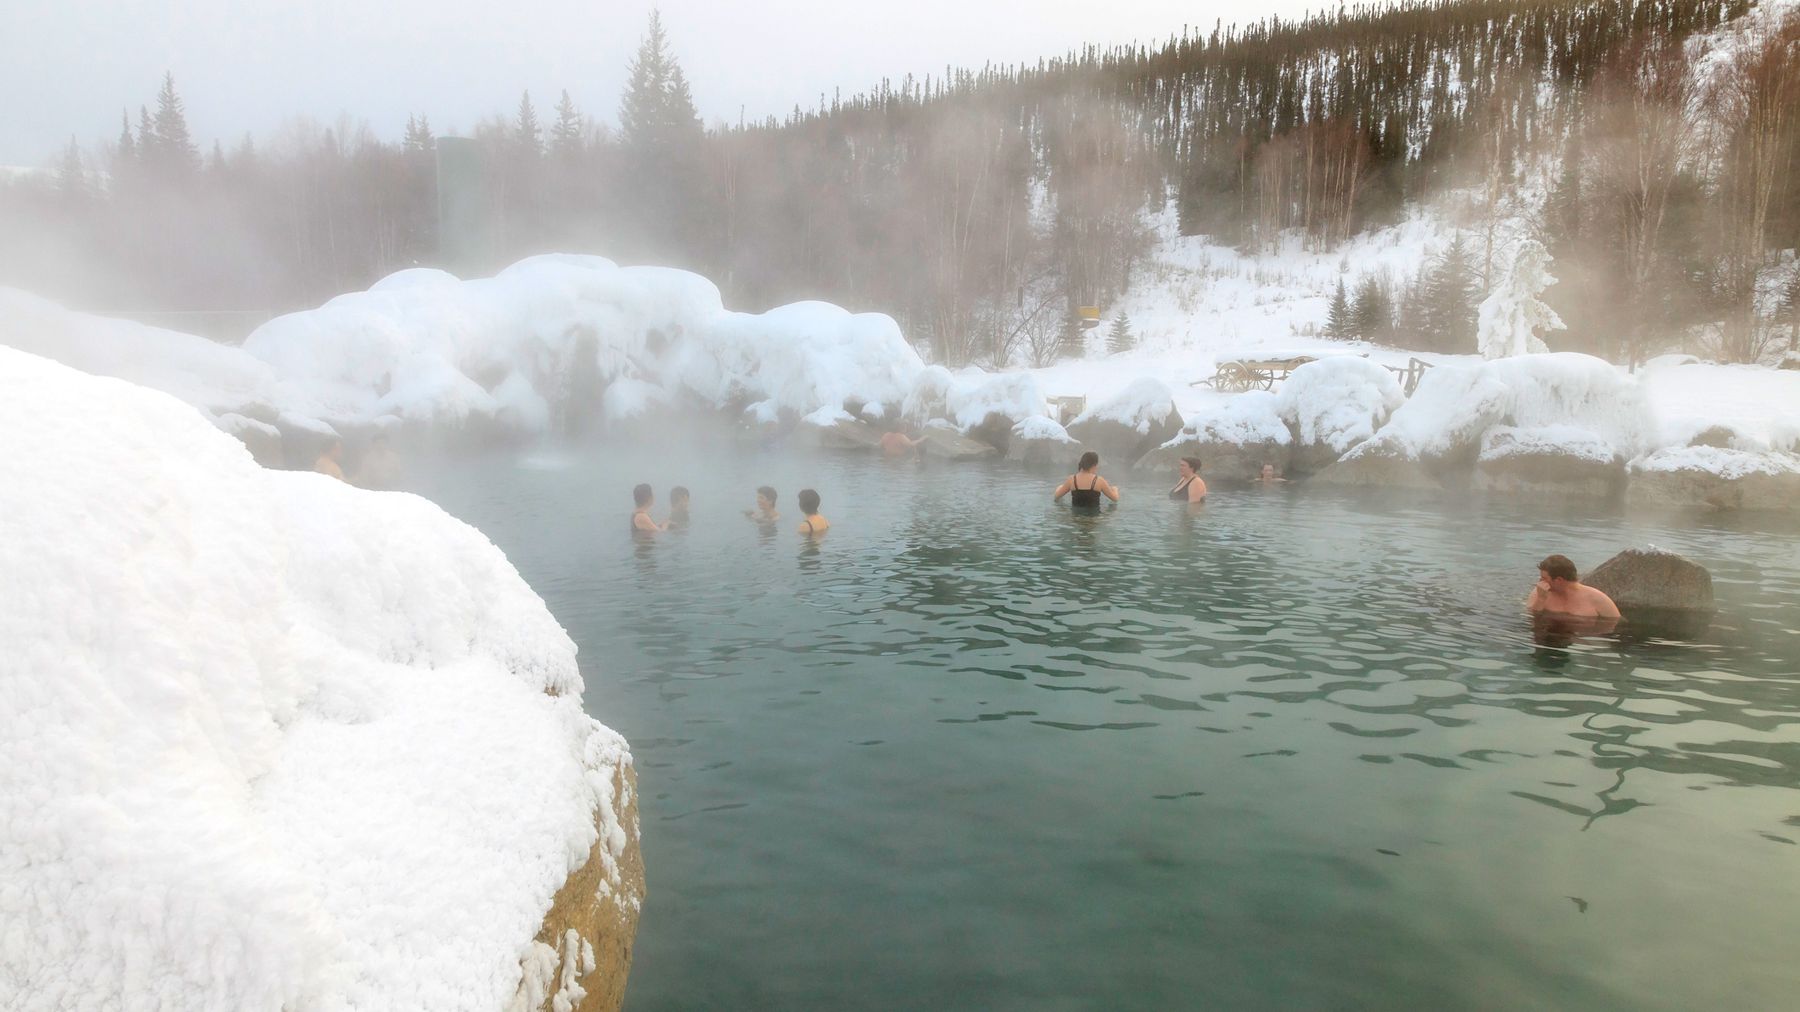 Experience the Most Scenic Hot Springs Destinations in the USA. The Perfect Place for an Unforgettable Getaway!